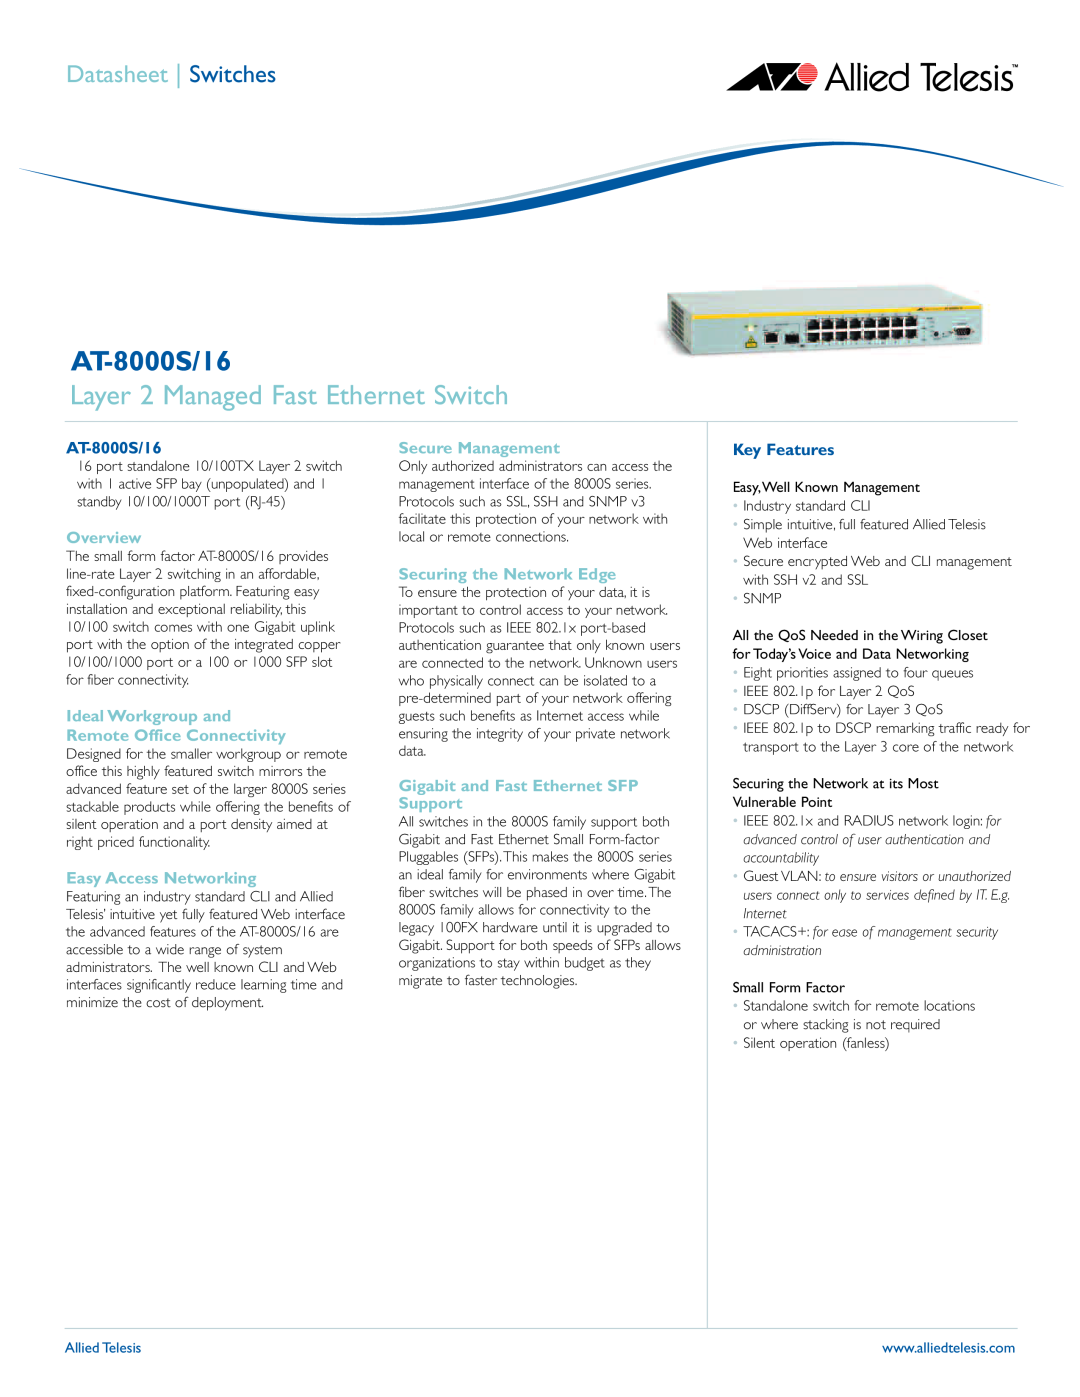 Allied Telesis AT-8000S/16 manual Layer 2 Managed Fast Ethernet Switch, Overview, Easy Access Networking, Key Features 